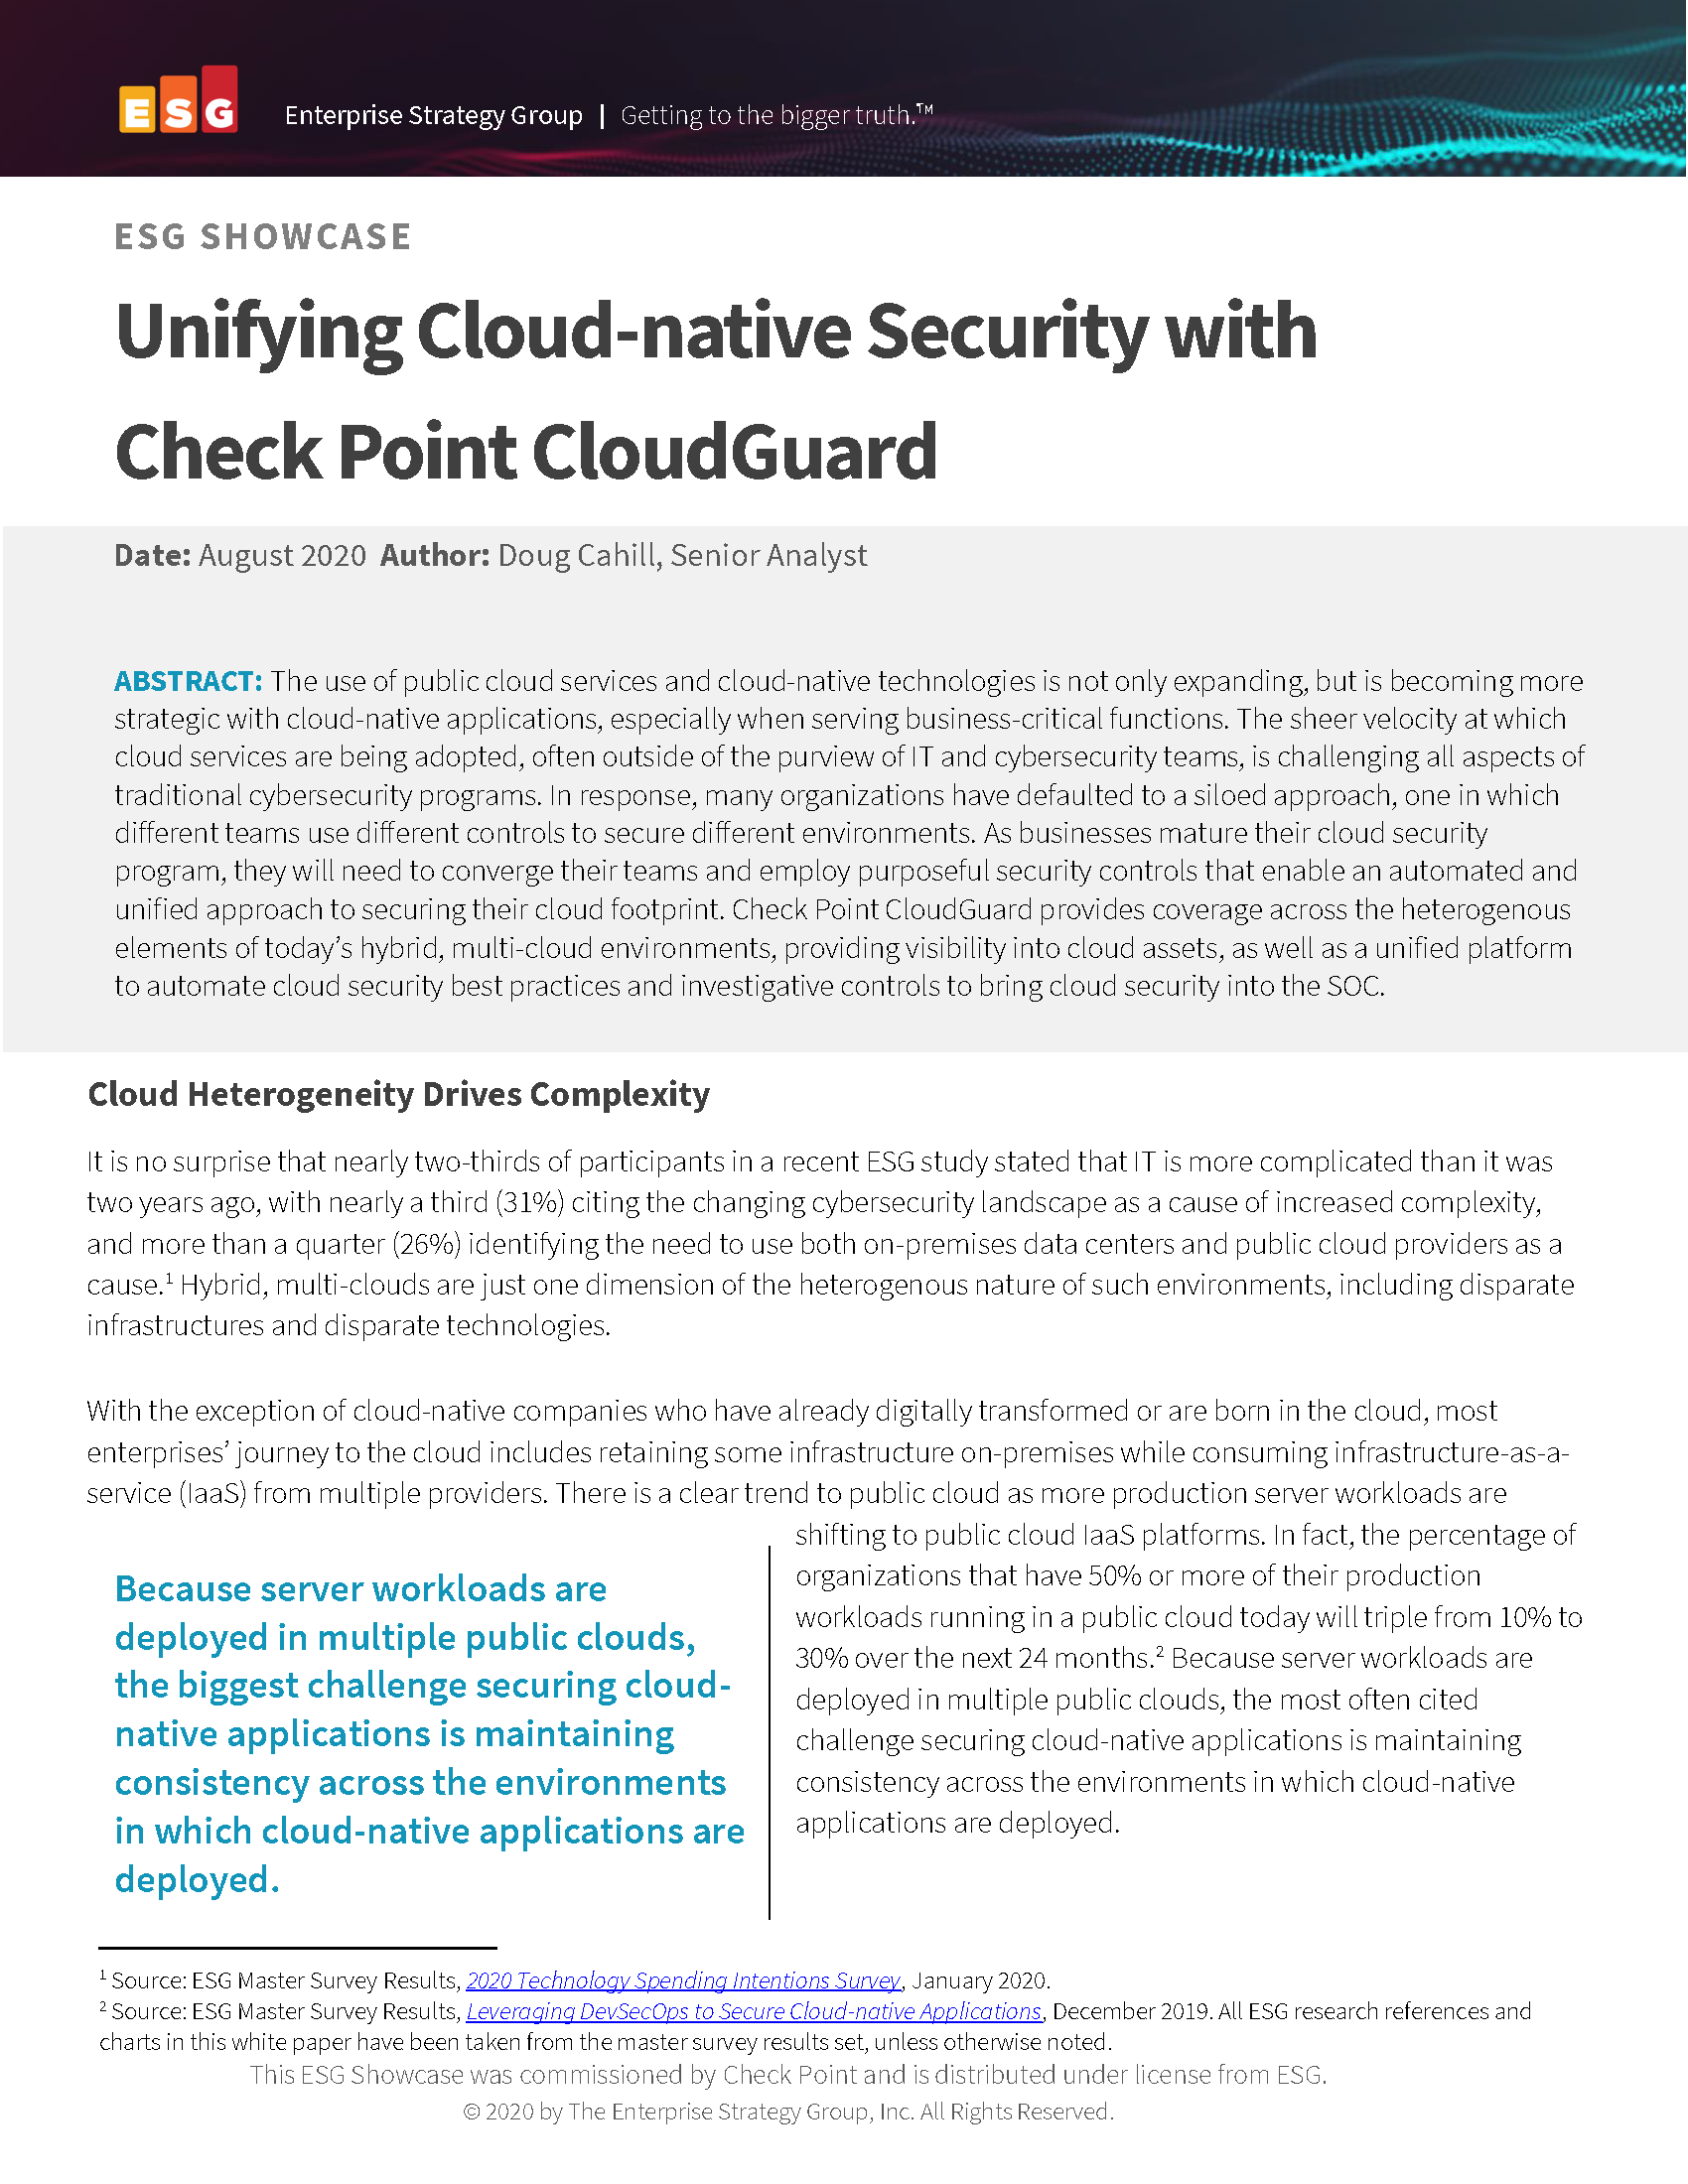 Pages from ESG Report-check-point-unified-cloud-security